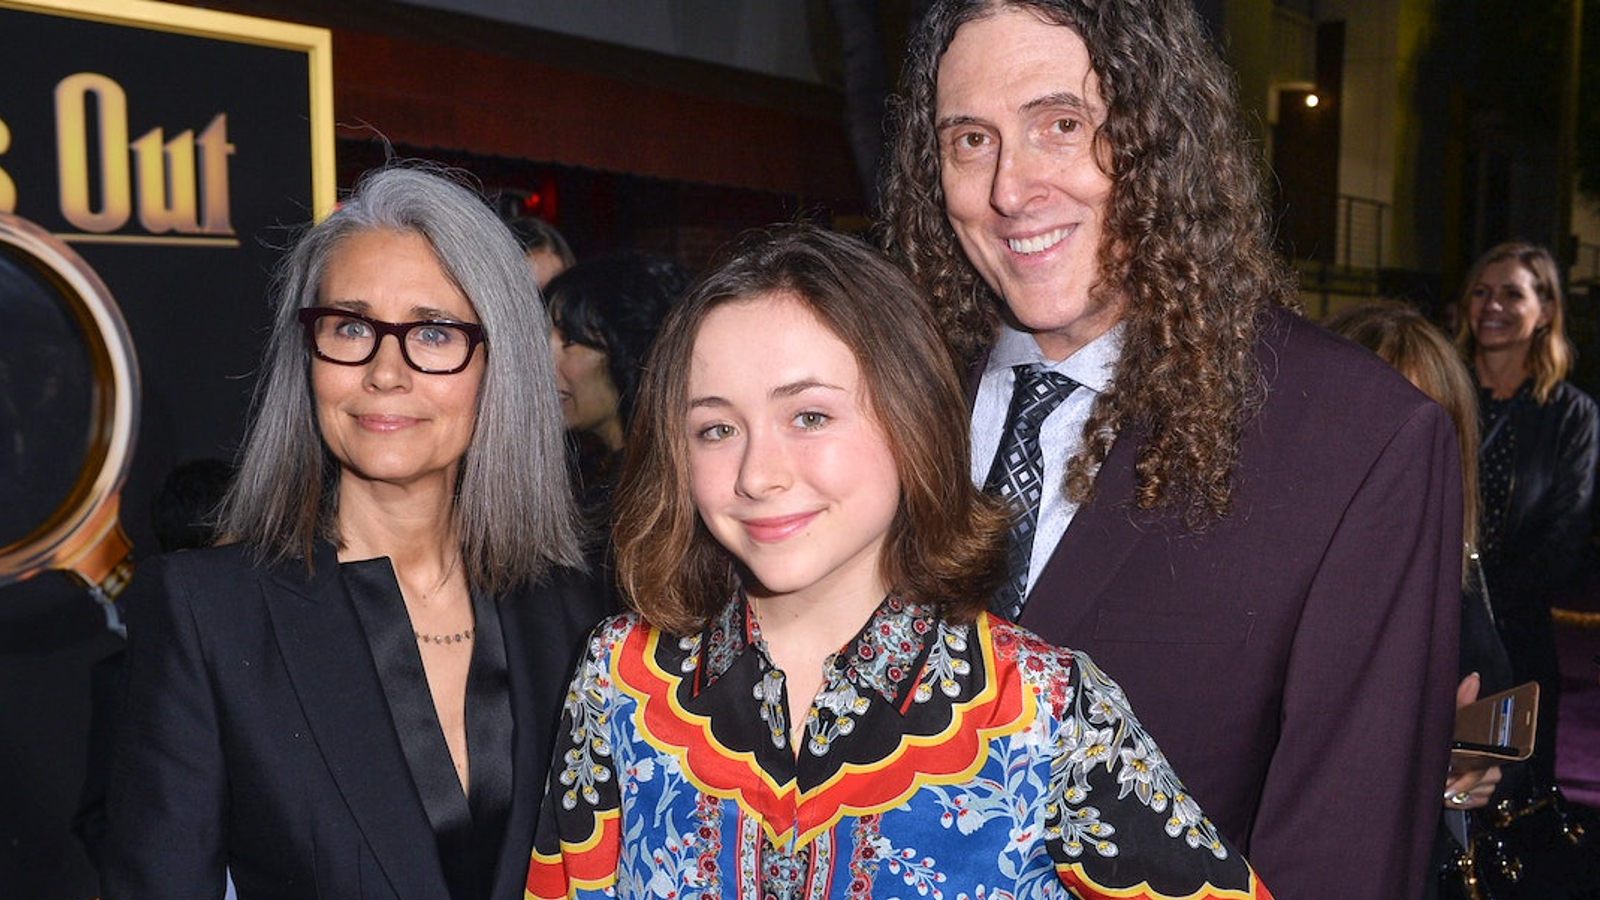 Weird Al with his family